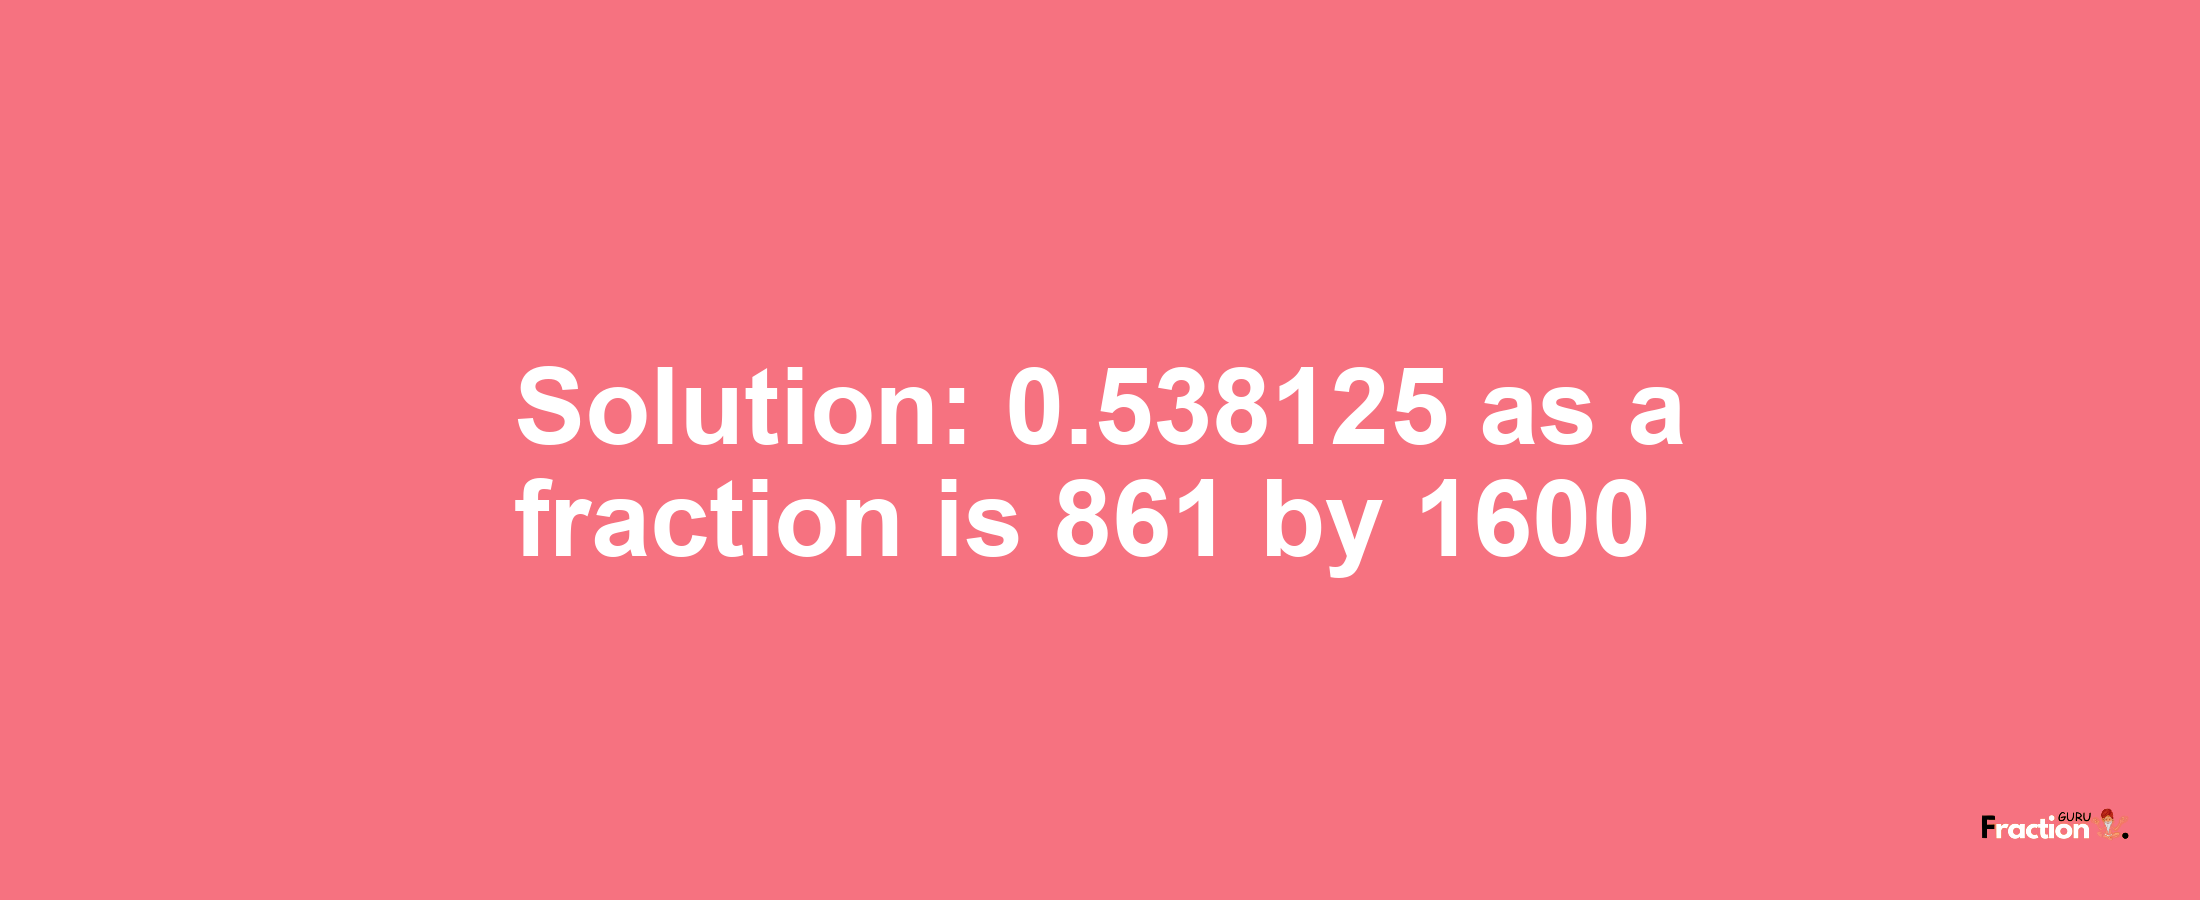 Solution:0.538125 as a fraction is 861/1600